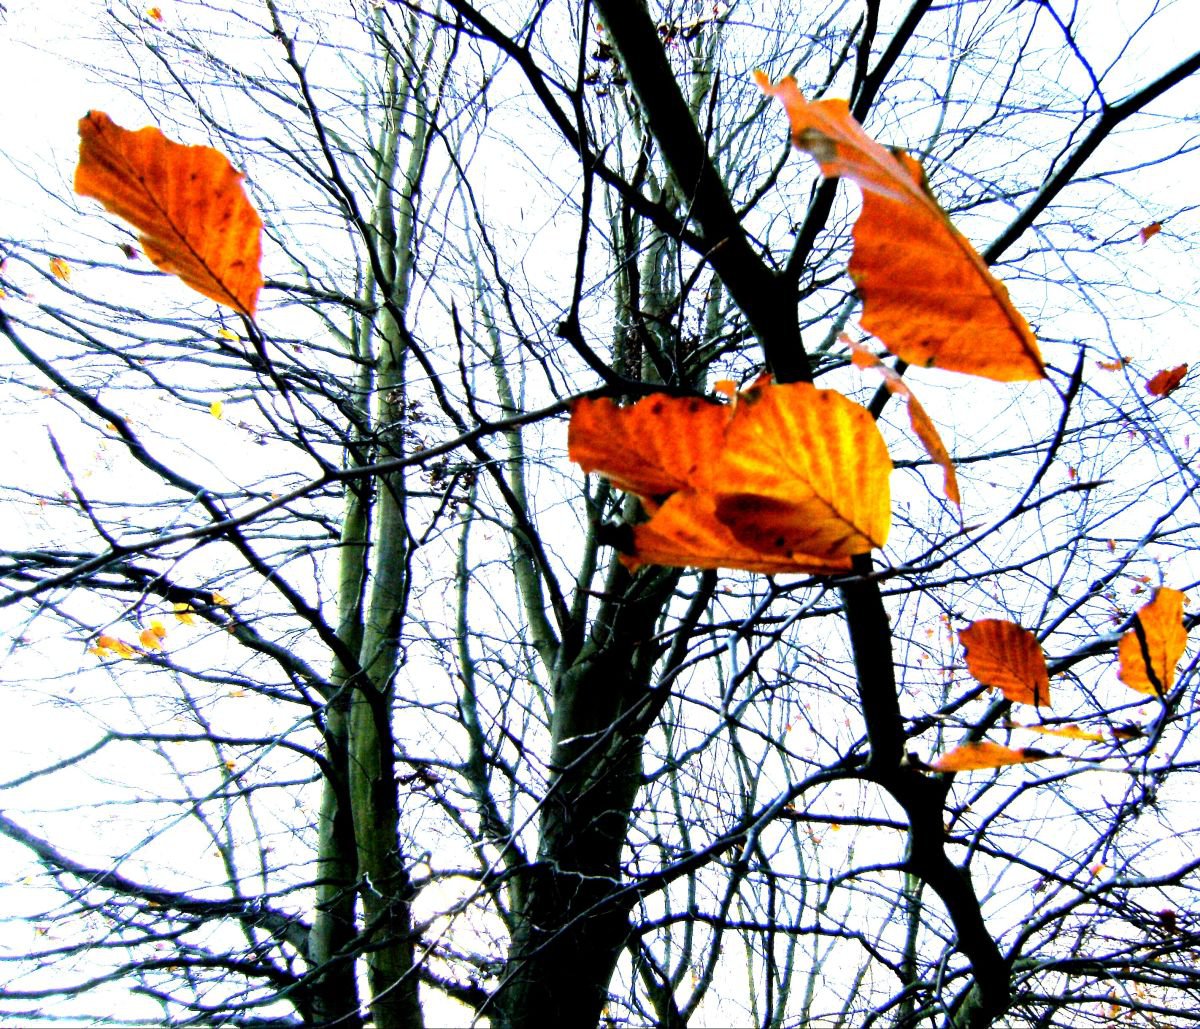 Windy leaves by Christopher West